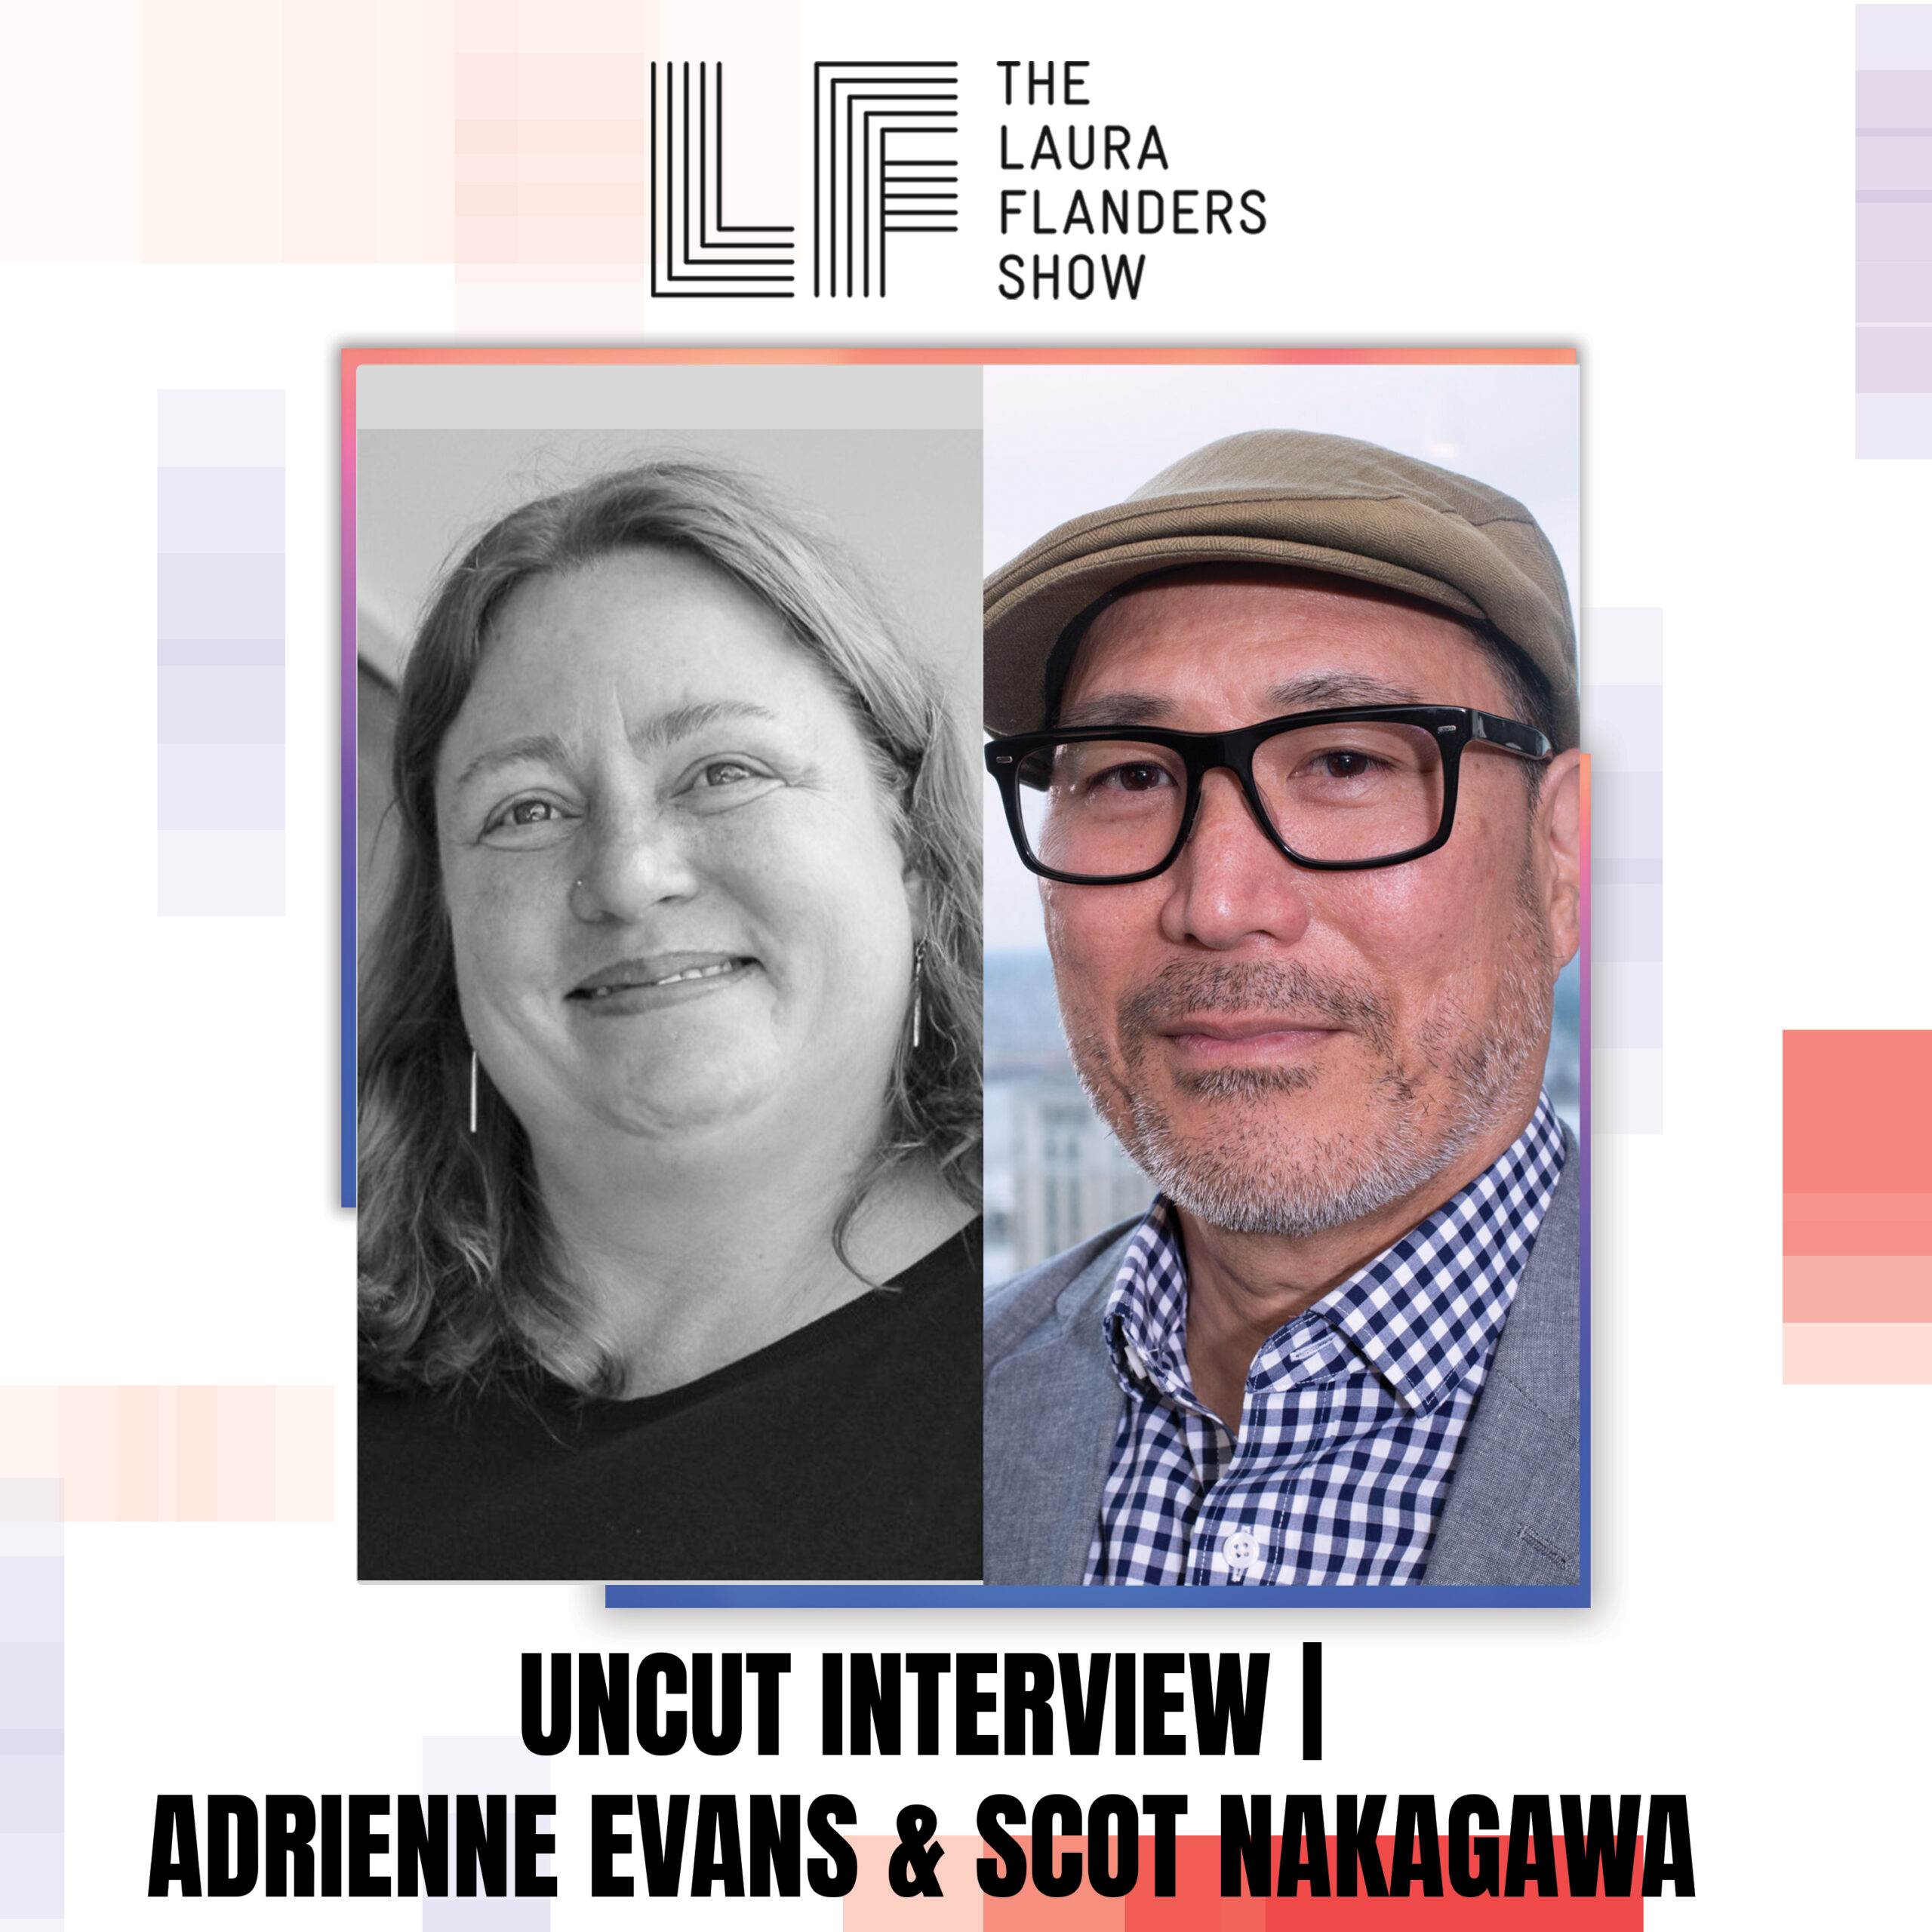 Photo of Adrienne Evans and Scot Nakagawa with text 